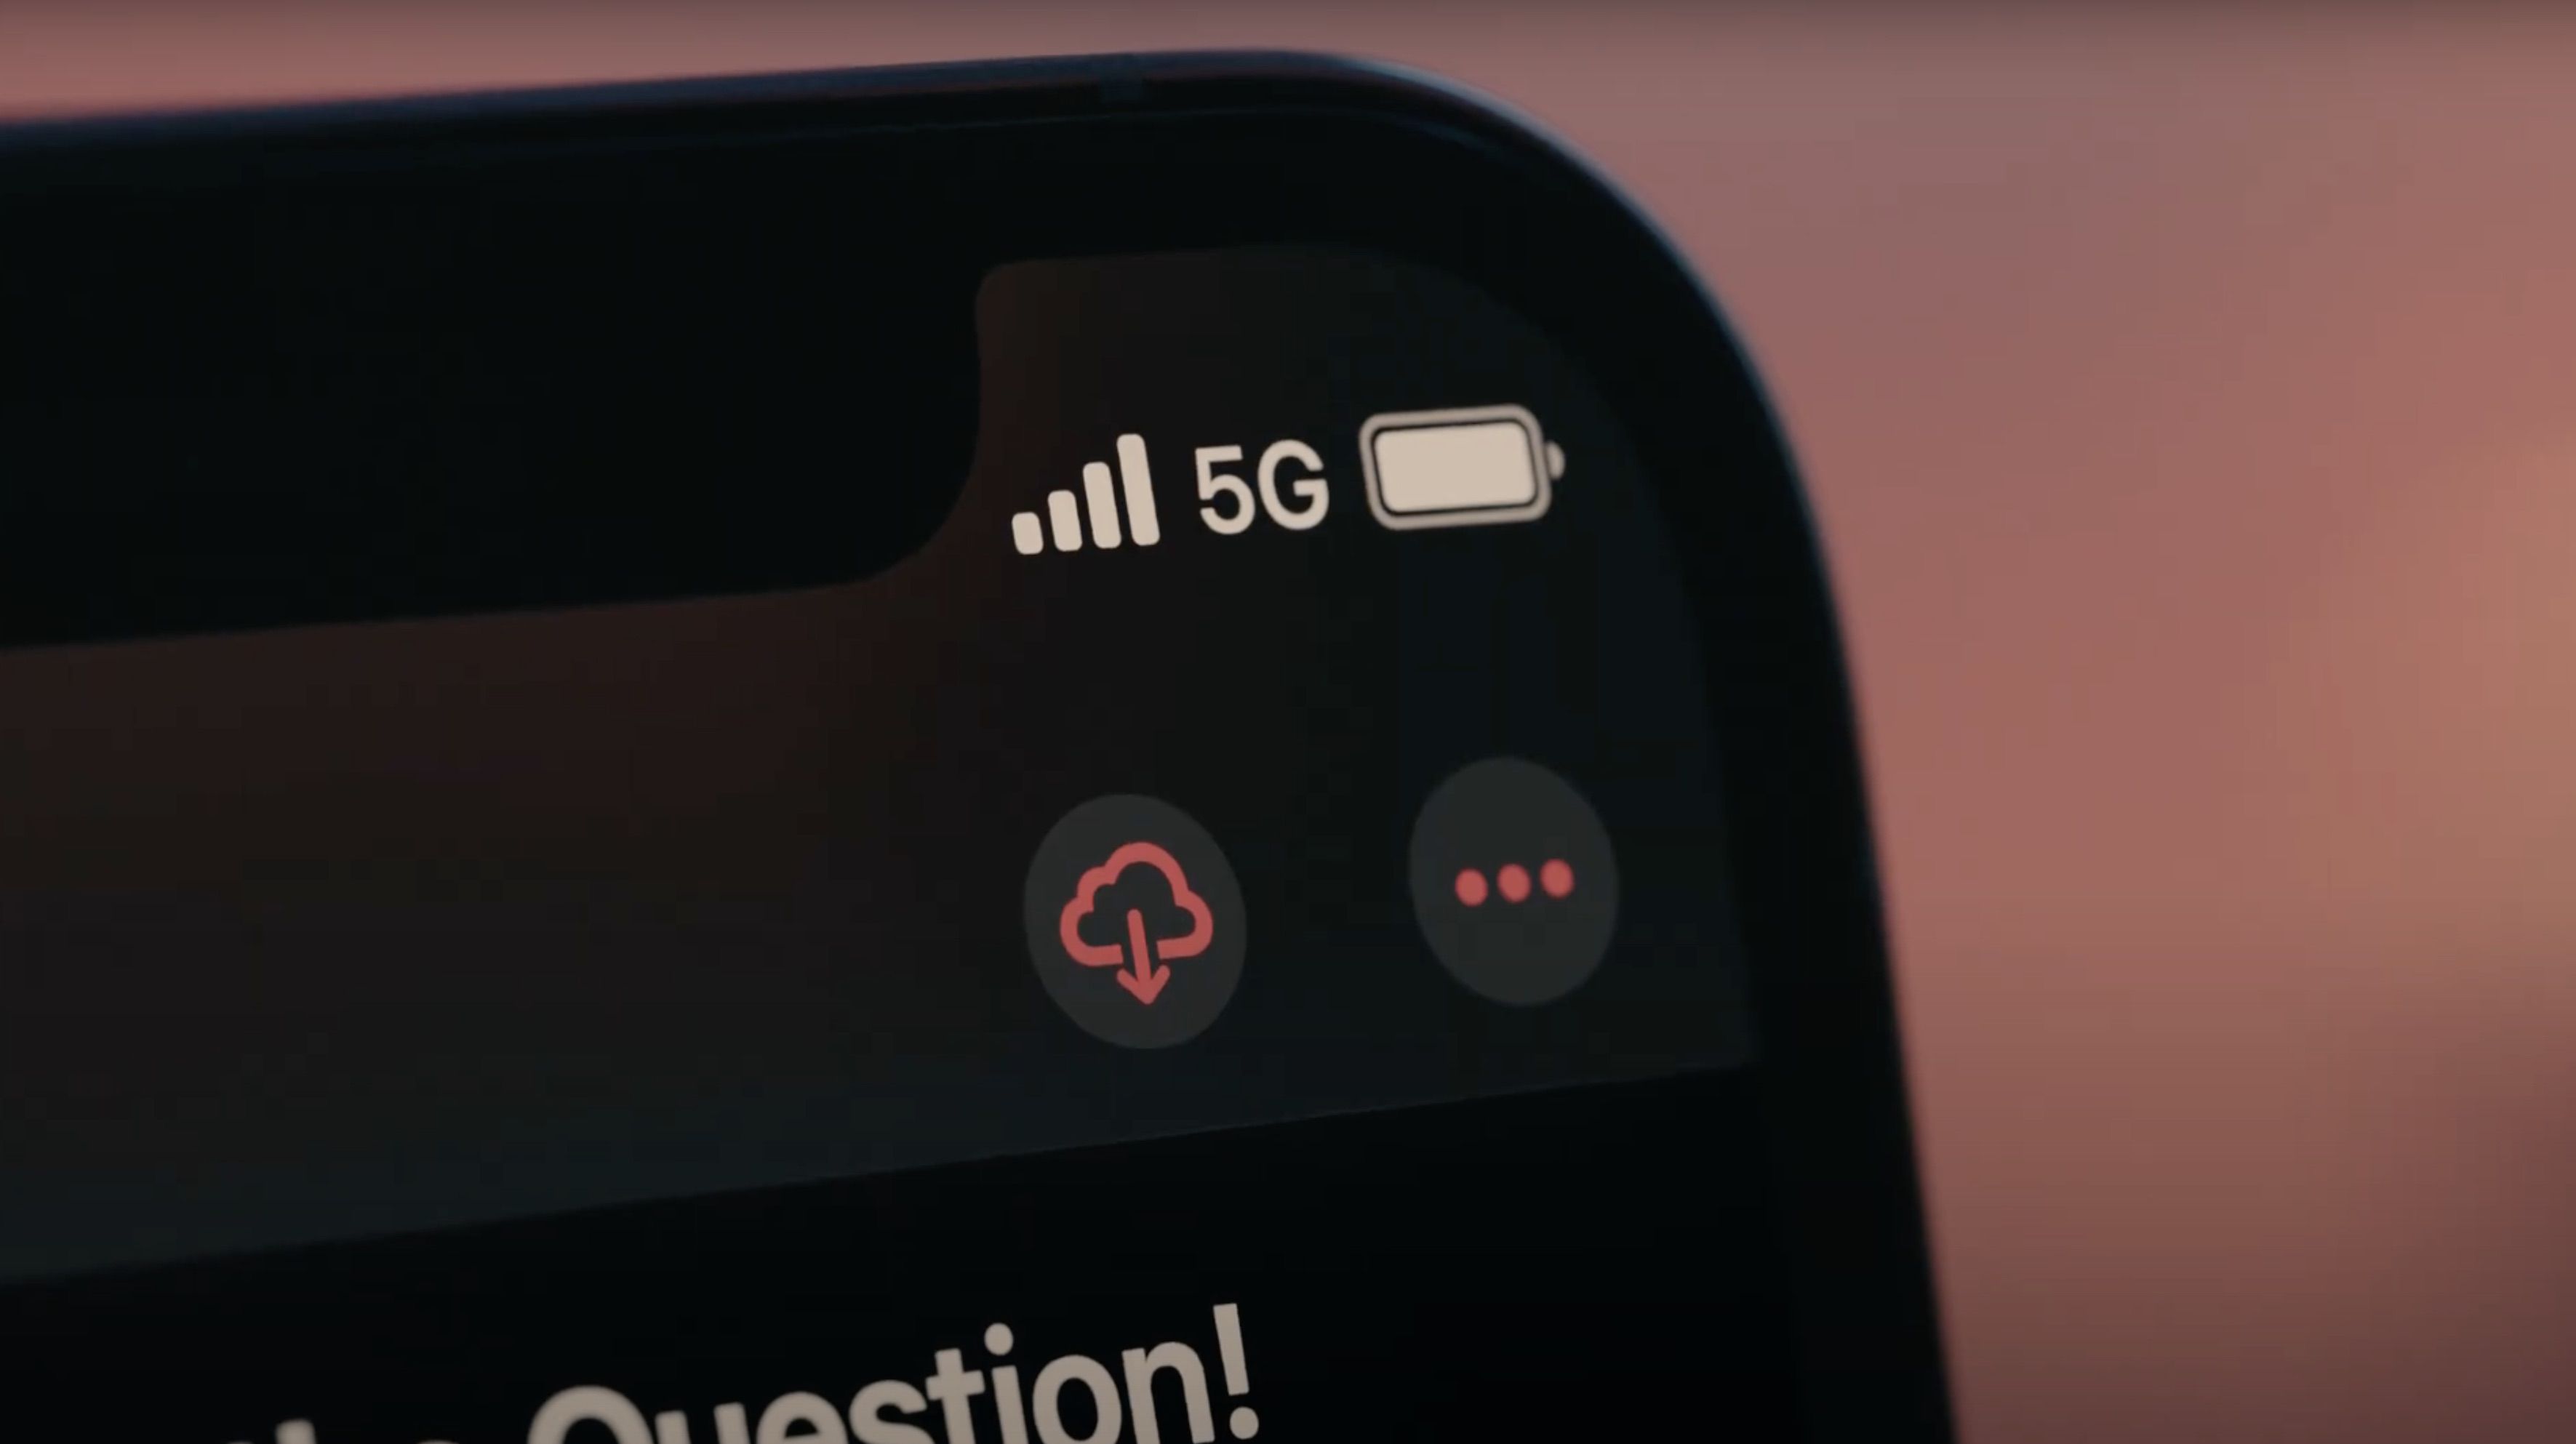 5G Drains iPhone 12 Battery 20% Faster Than 4G in Benchmark - MacRumors